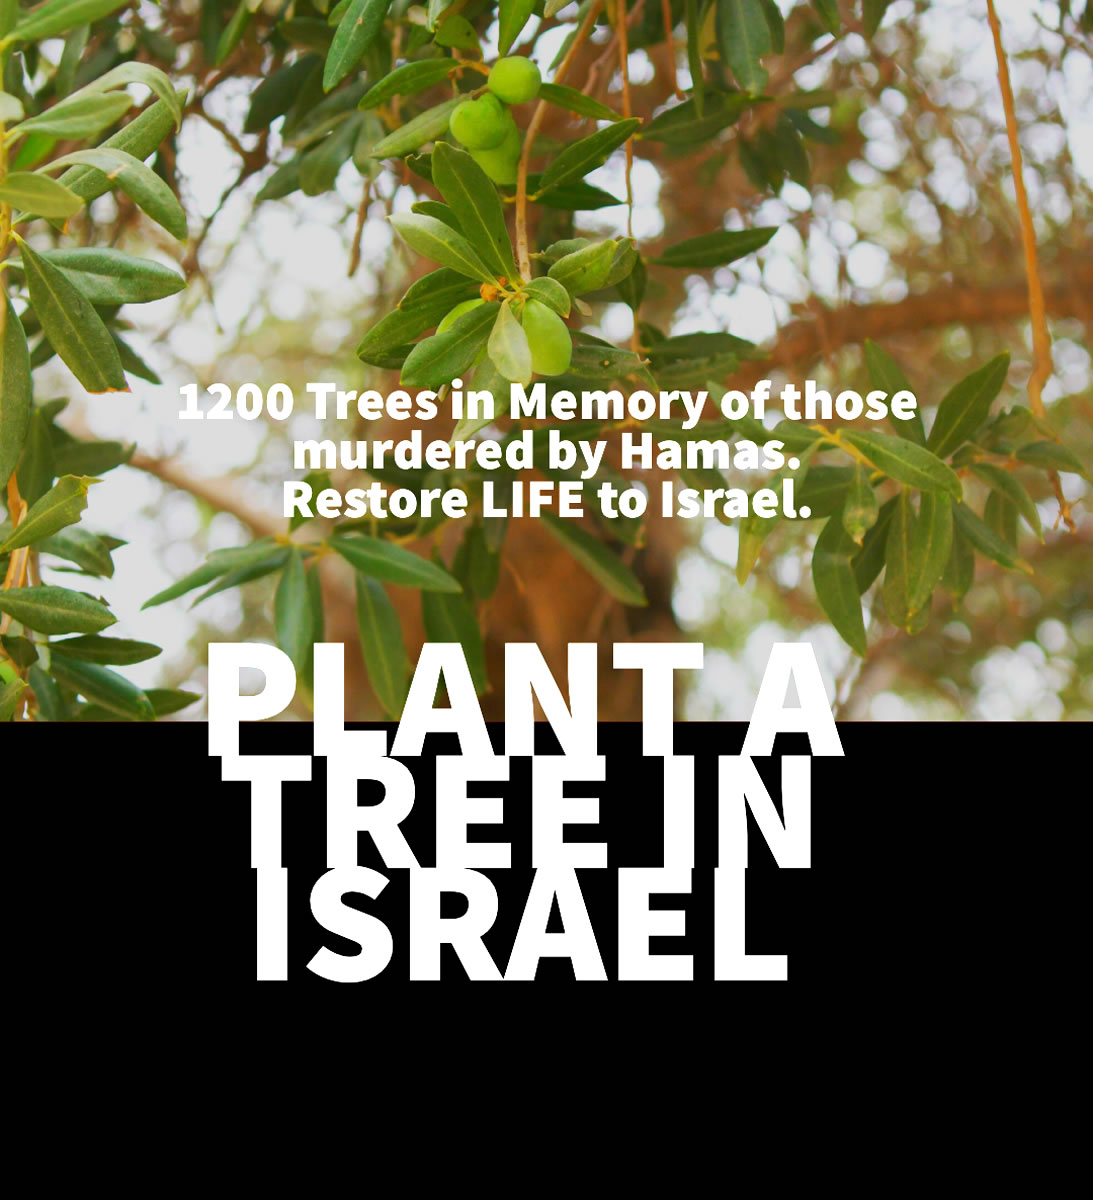 Plant a tree in Israel